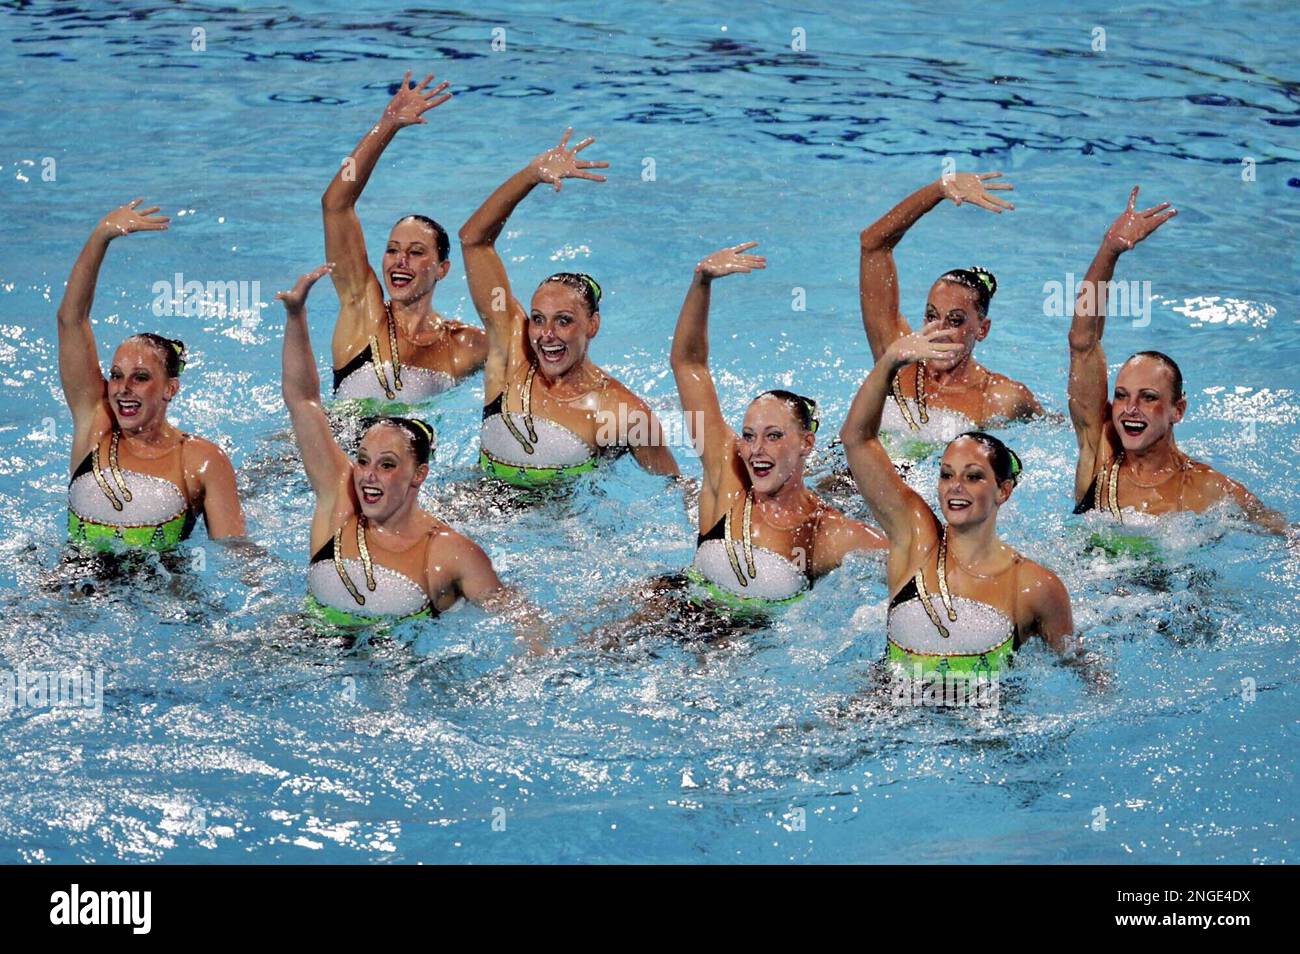 Members of the United States synchronized swimming team perform in the team event technical routine in the Olympic Aquatic Center at the 2004 Olympic Games in Athens, Thursday Aug